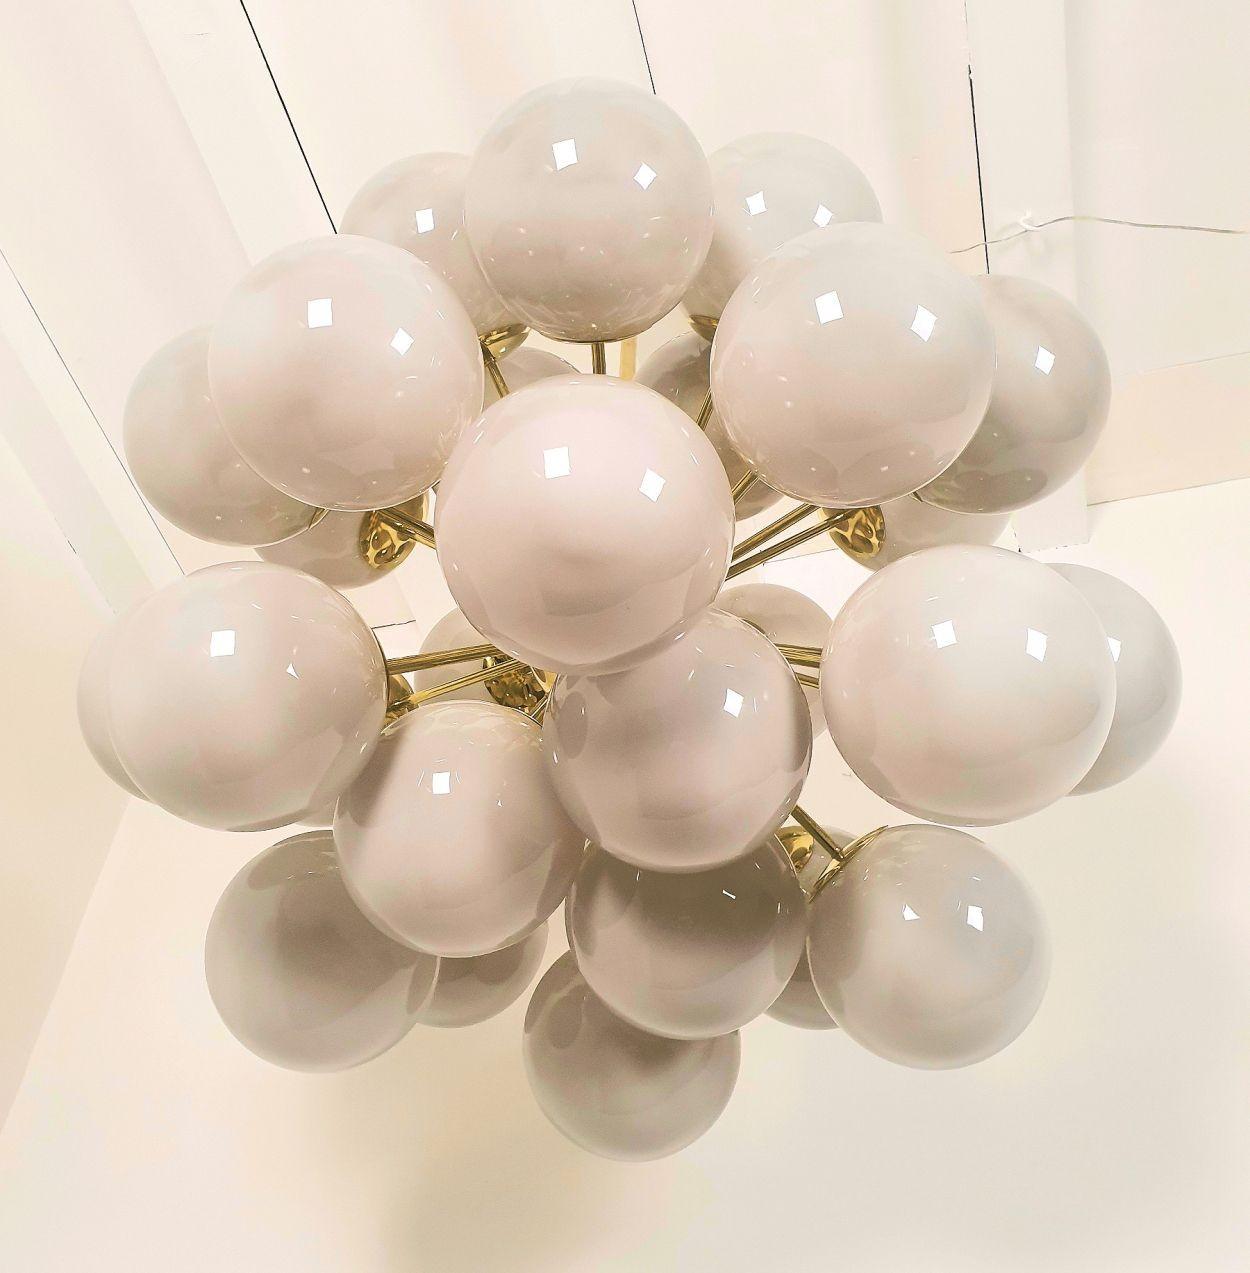 Late 20th Century Murano Glass and Brass Sputnik Chandelier - Italy For Sale